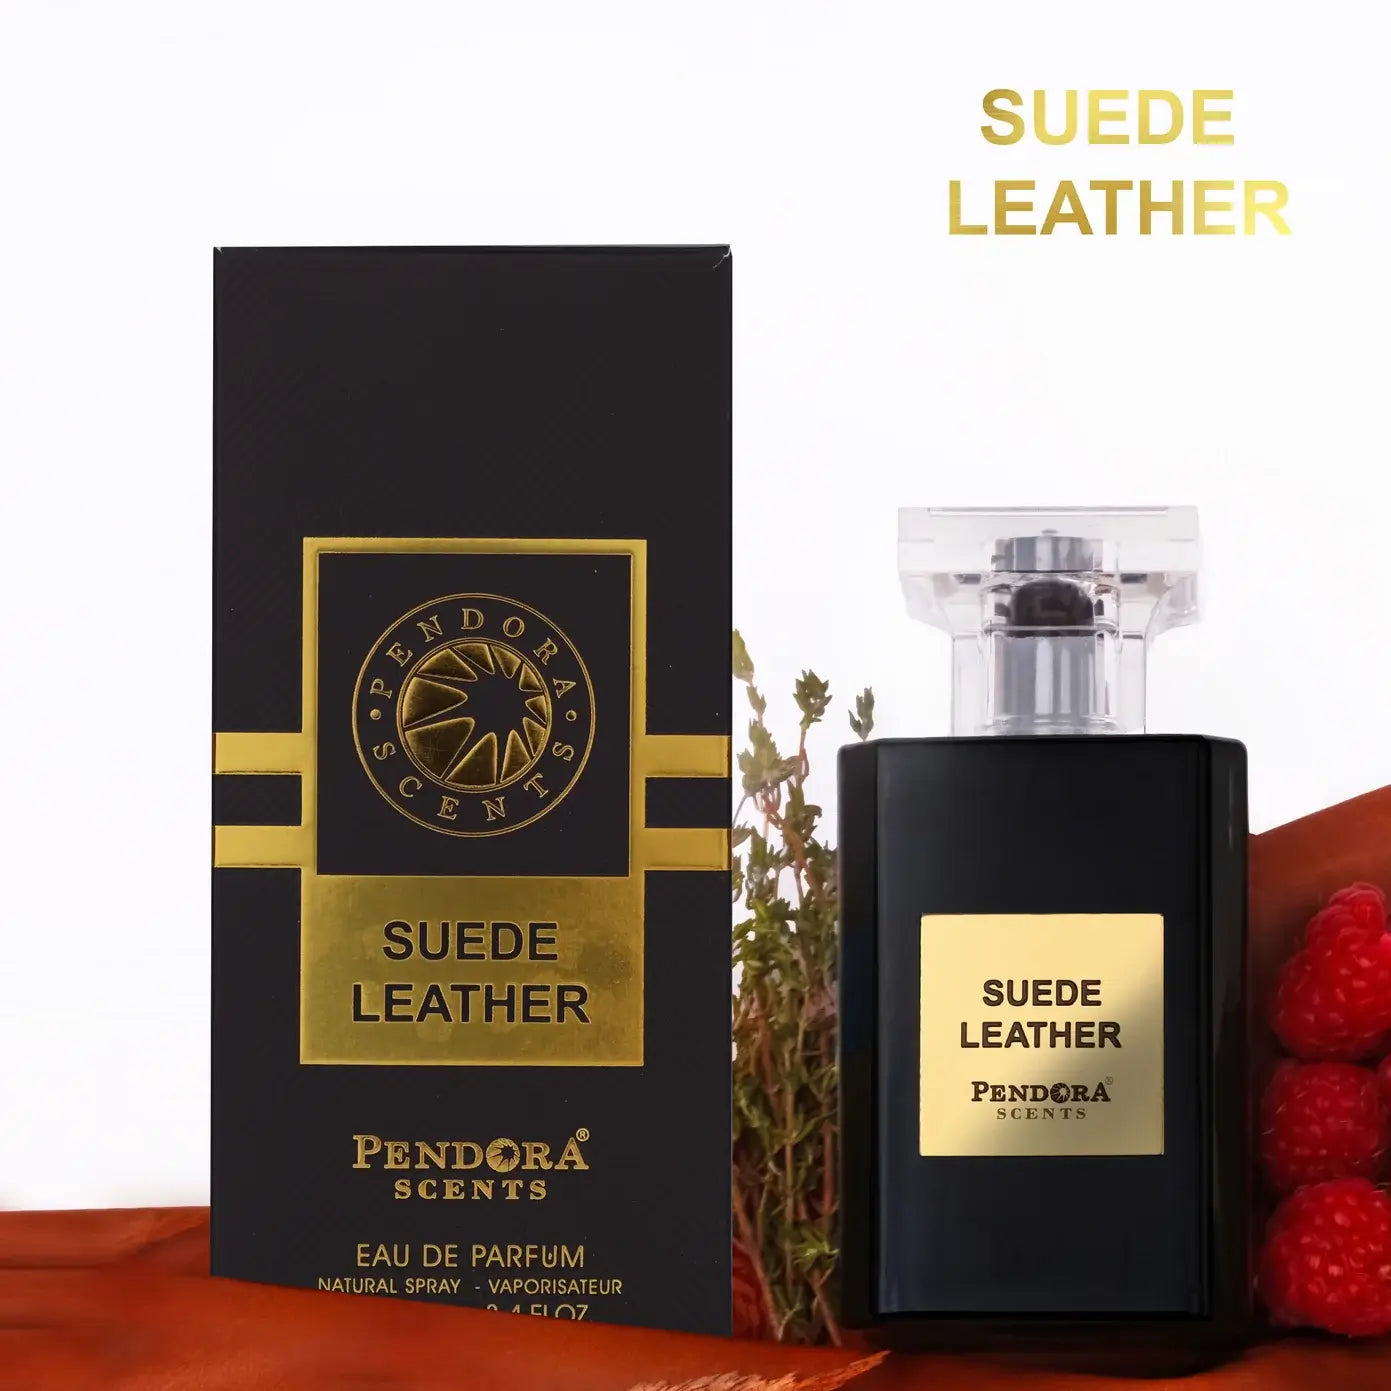 Perfume SUEDE LEATHER-Paris Corner box and bottle